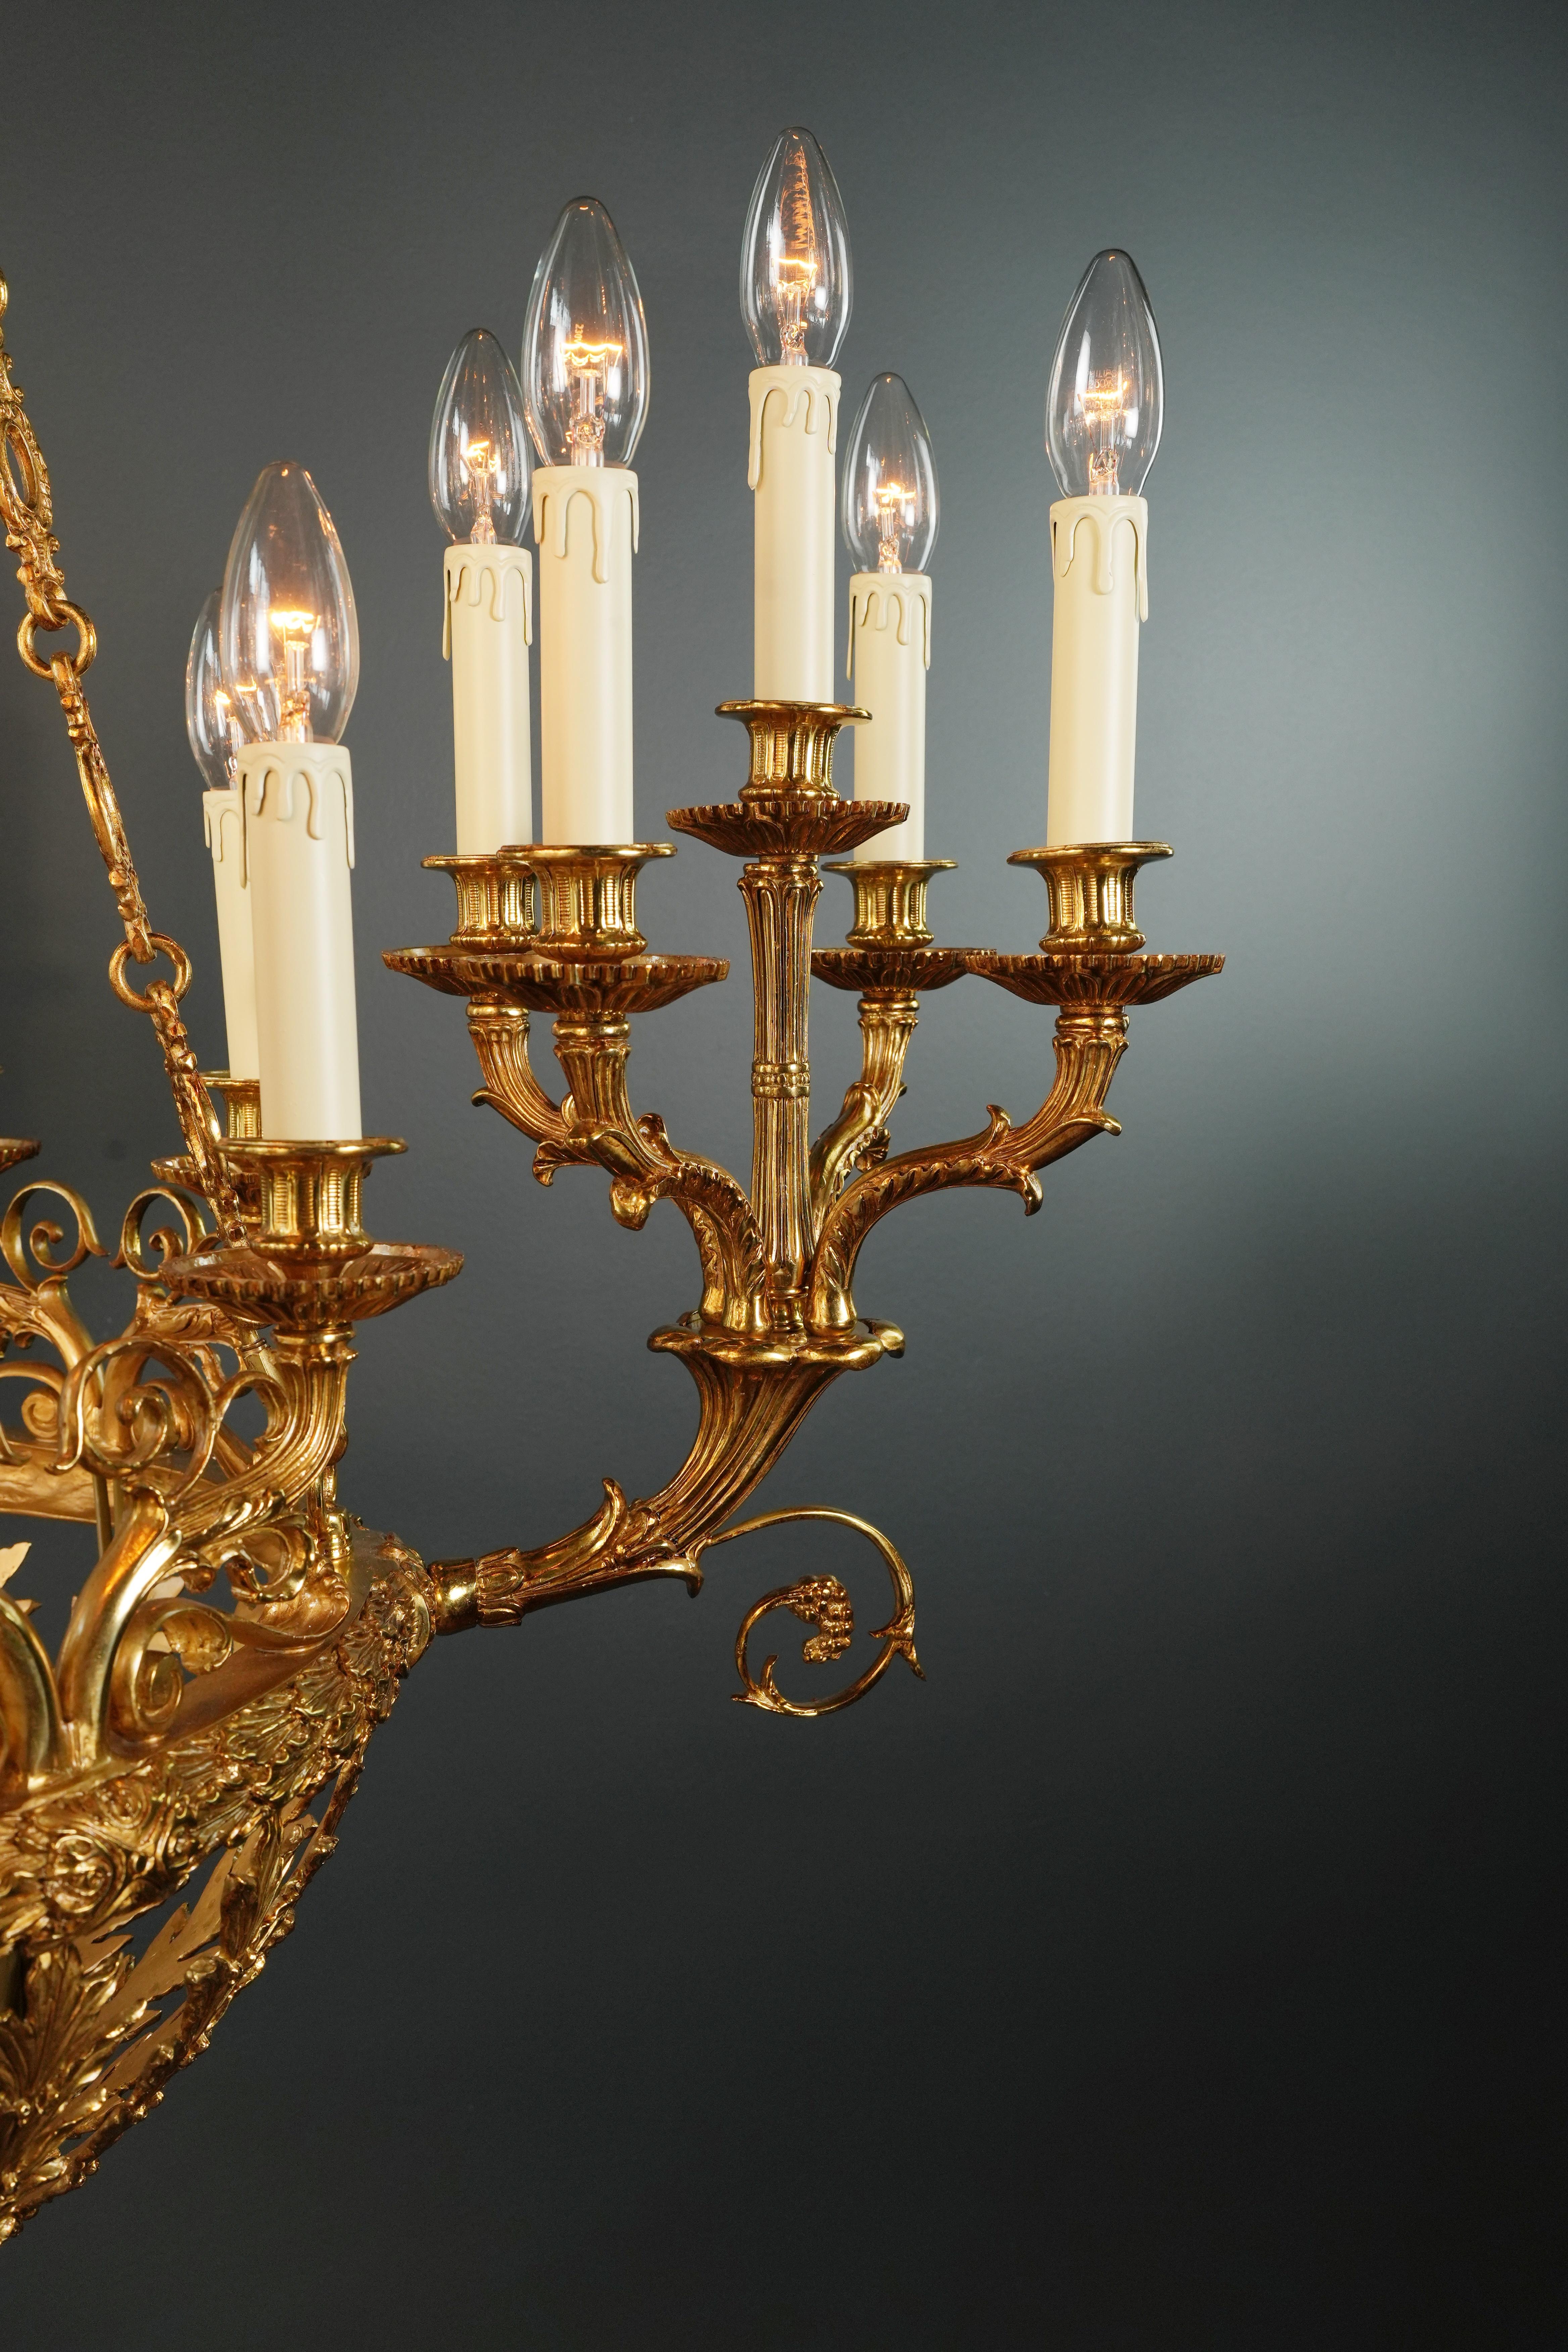 21st Century Baroque Brass Empire Chandelier Crystal Lustre Lamp Antique Gold  For Sale 2